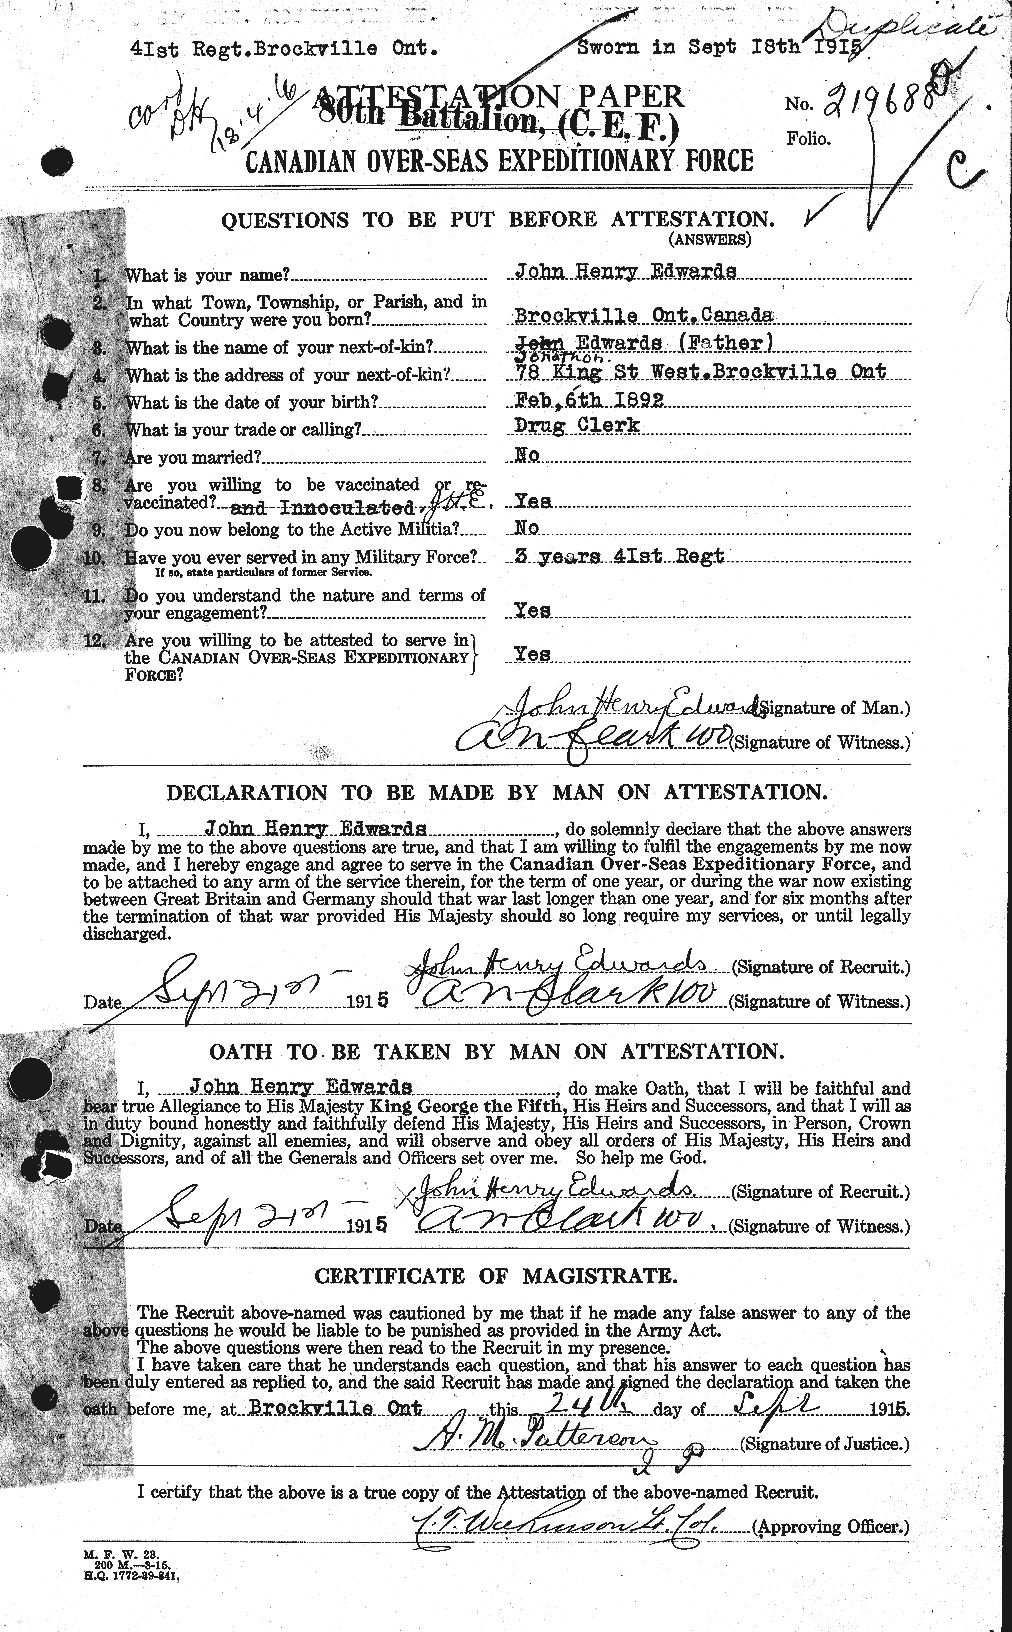 Personnel Records of the First World War - CEF 310137a